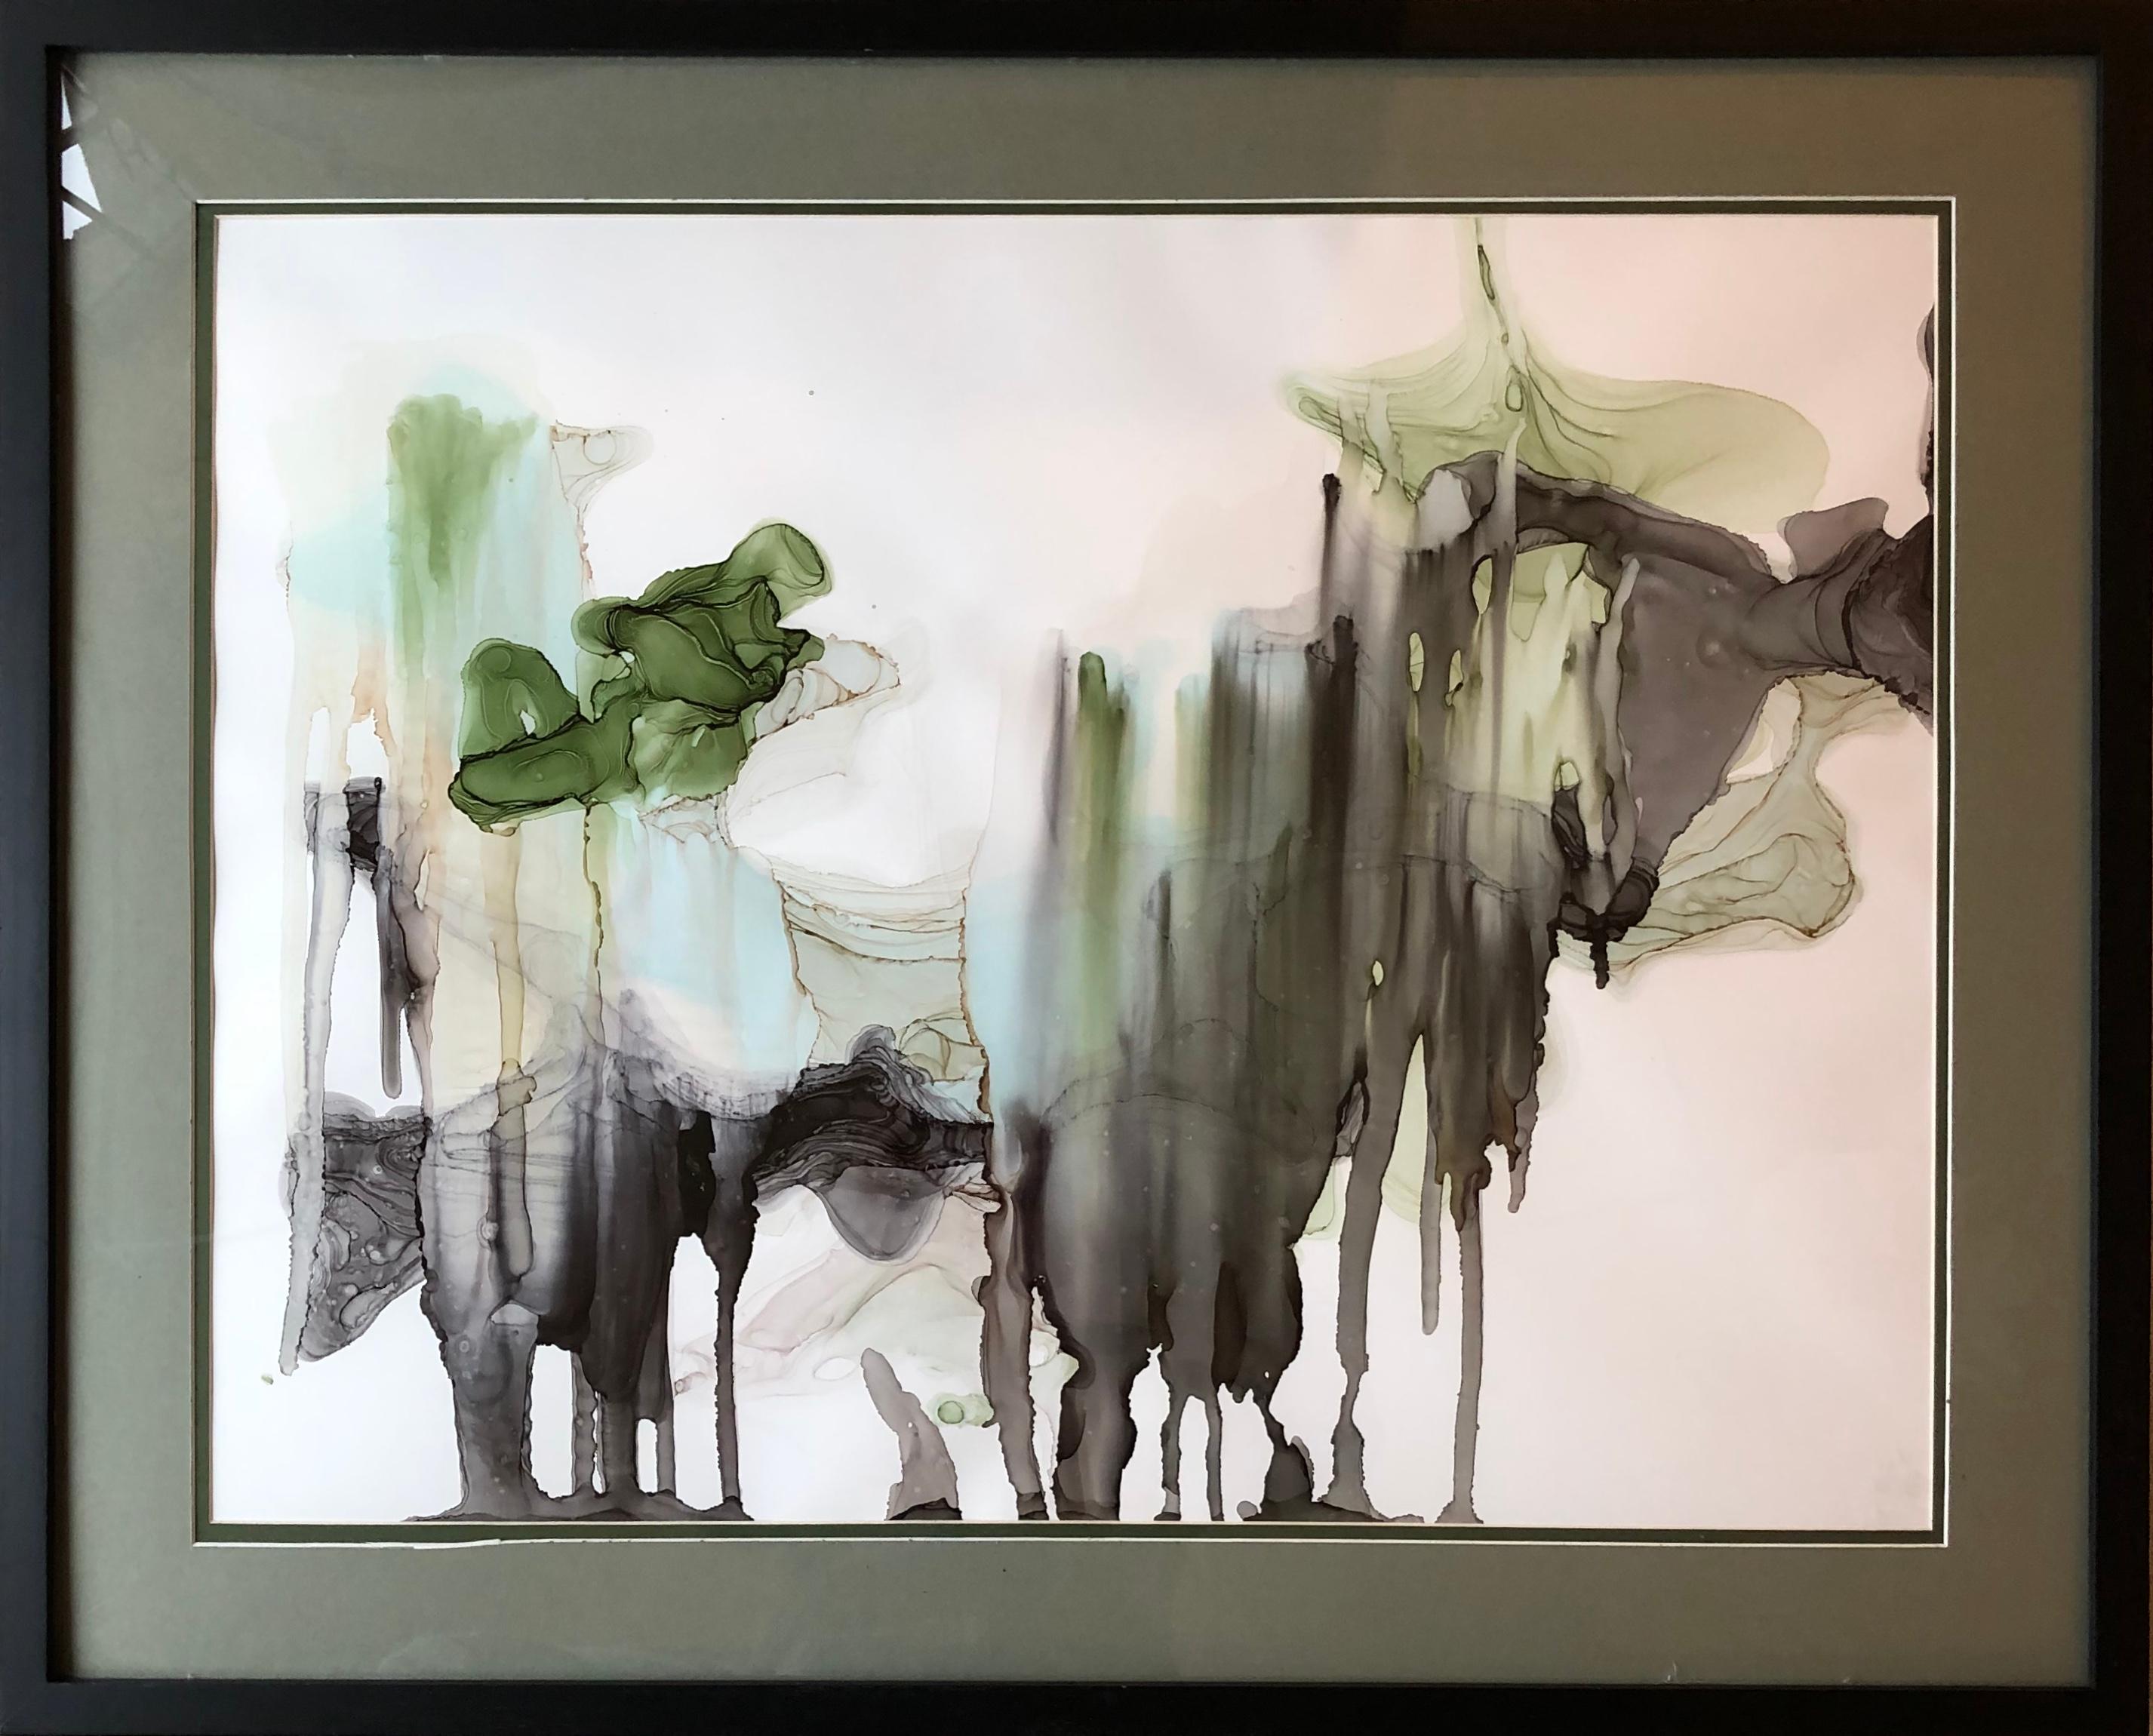 Raining in Jungles-abstract art, made in green, back, grey, olive color